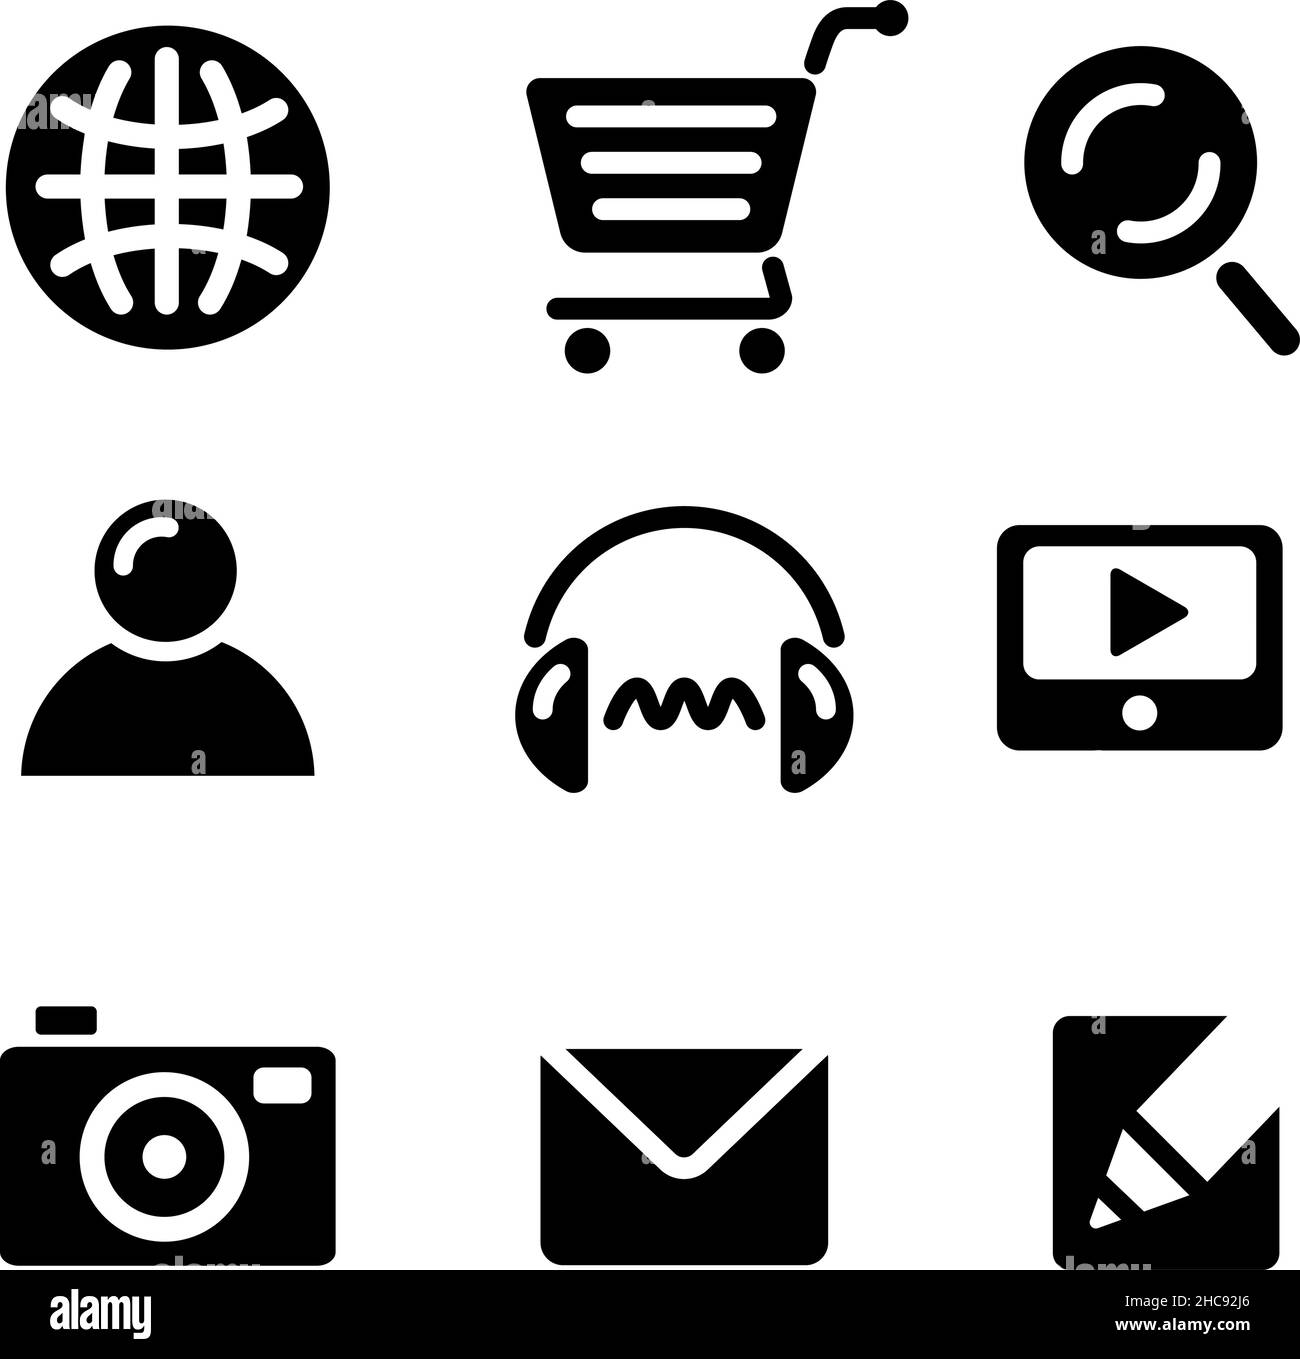 icons and pictograms for programm apps and web usage illustration Stock Vector